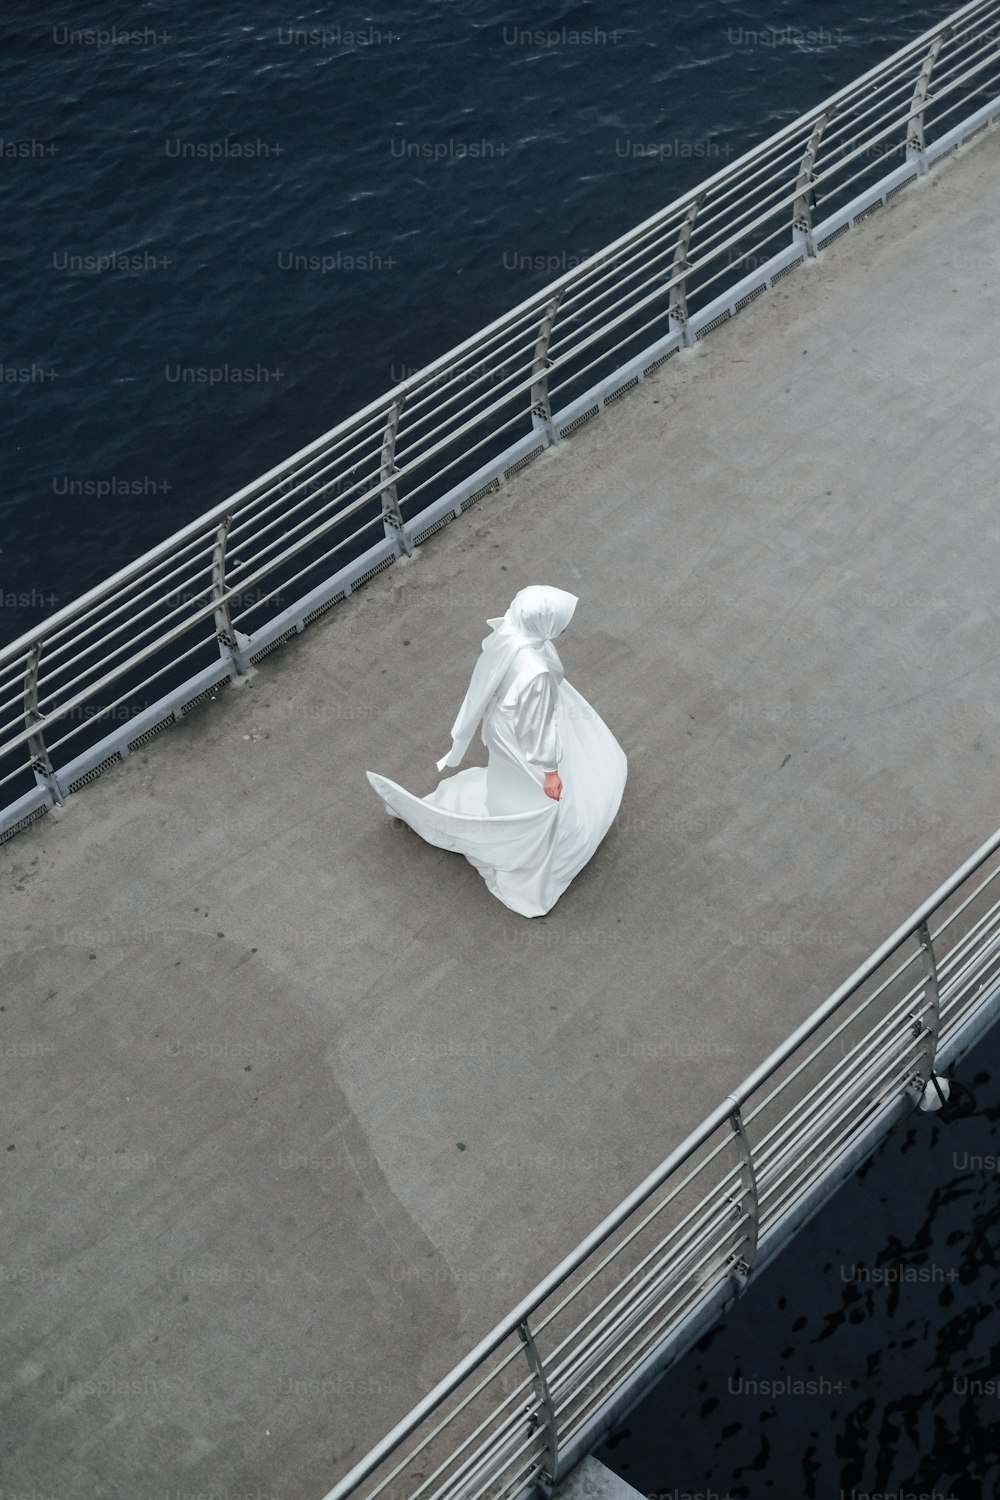 a statue of a person sitting on a bridge over water